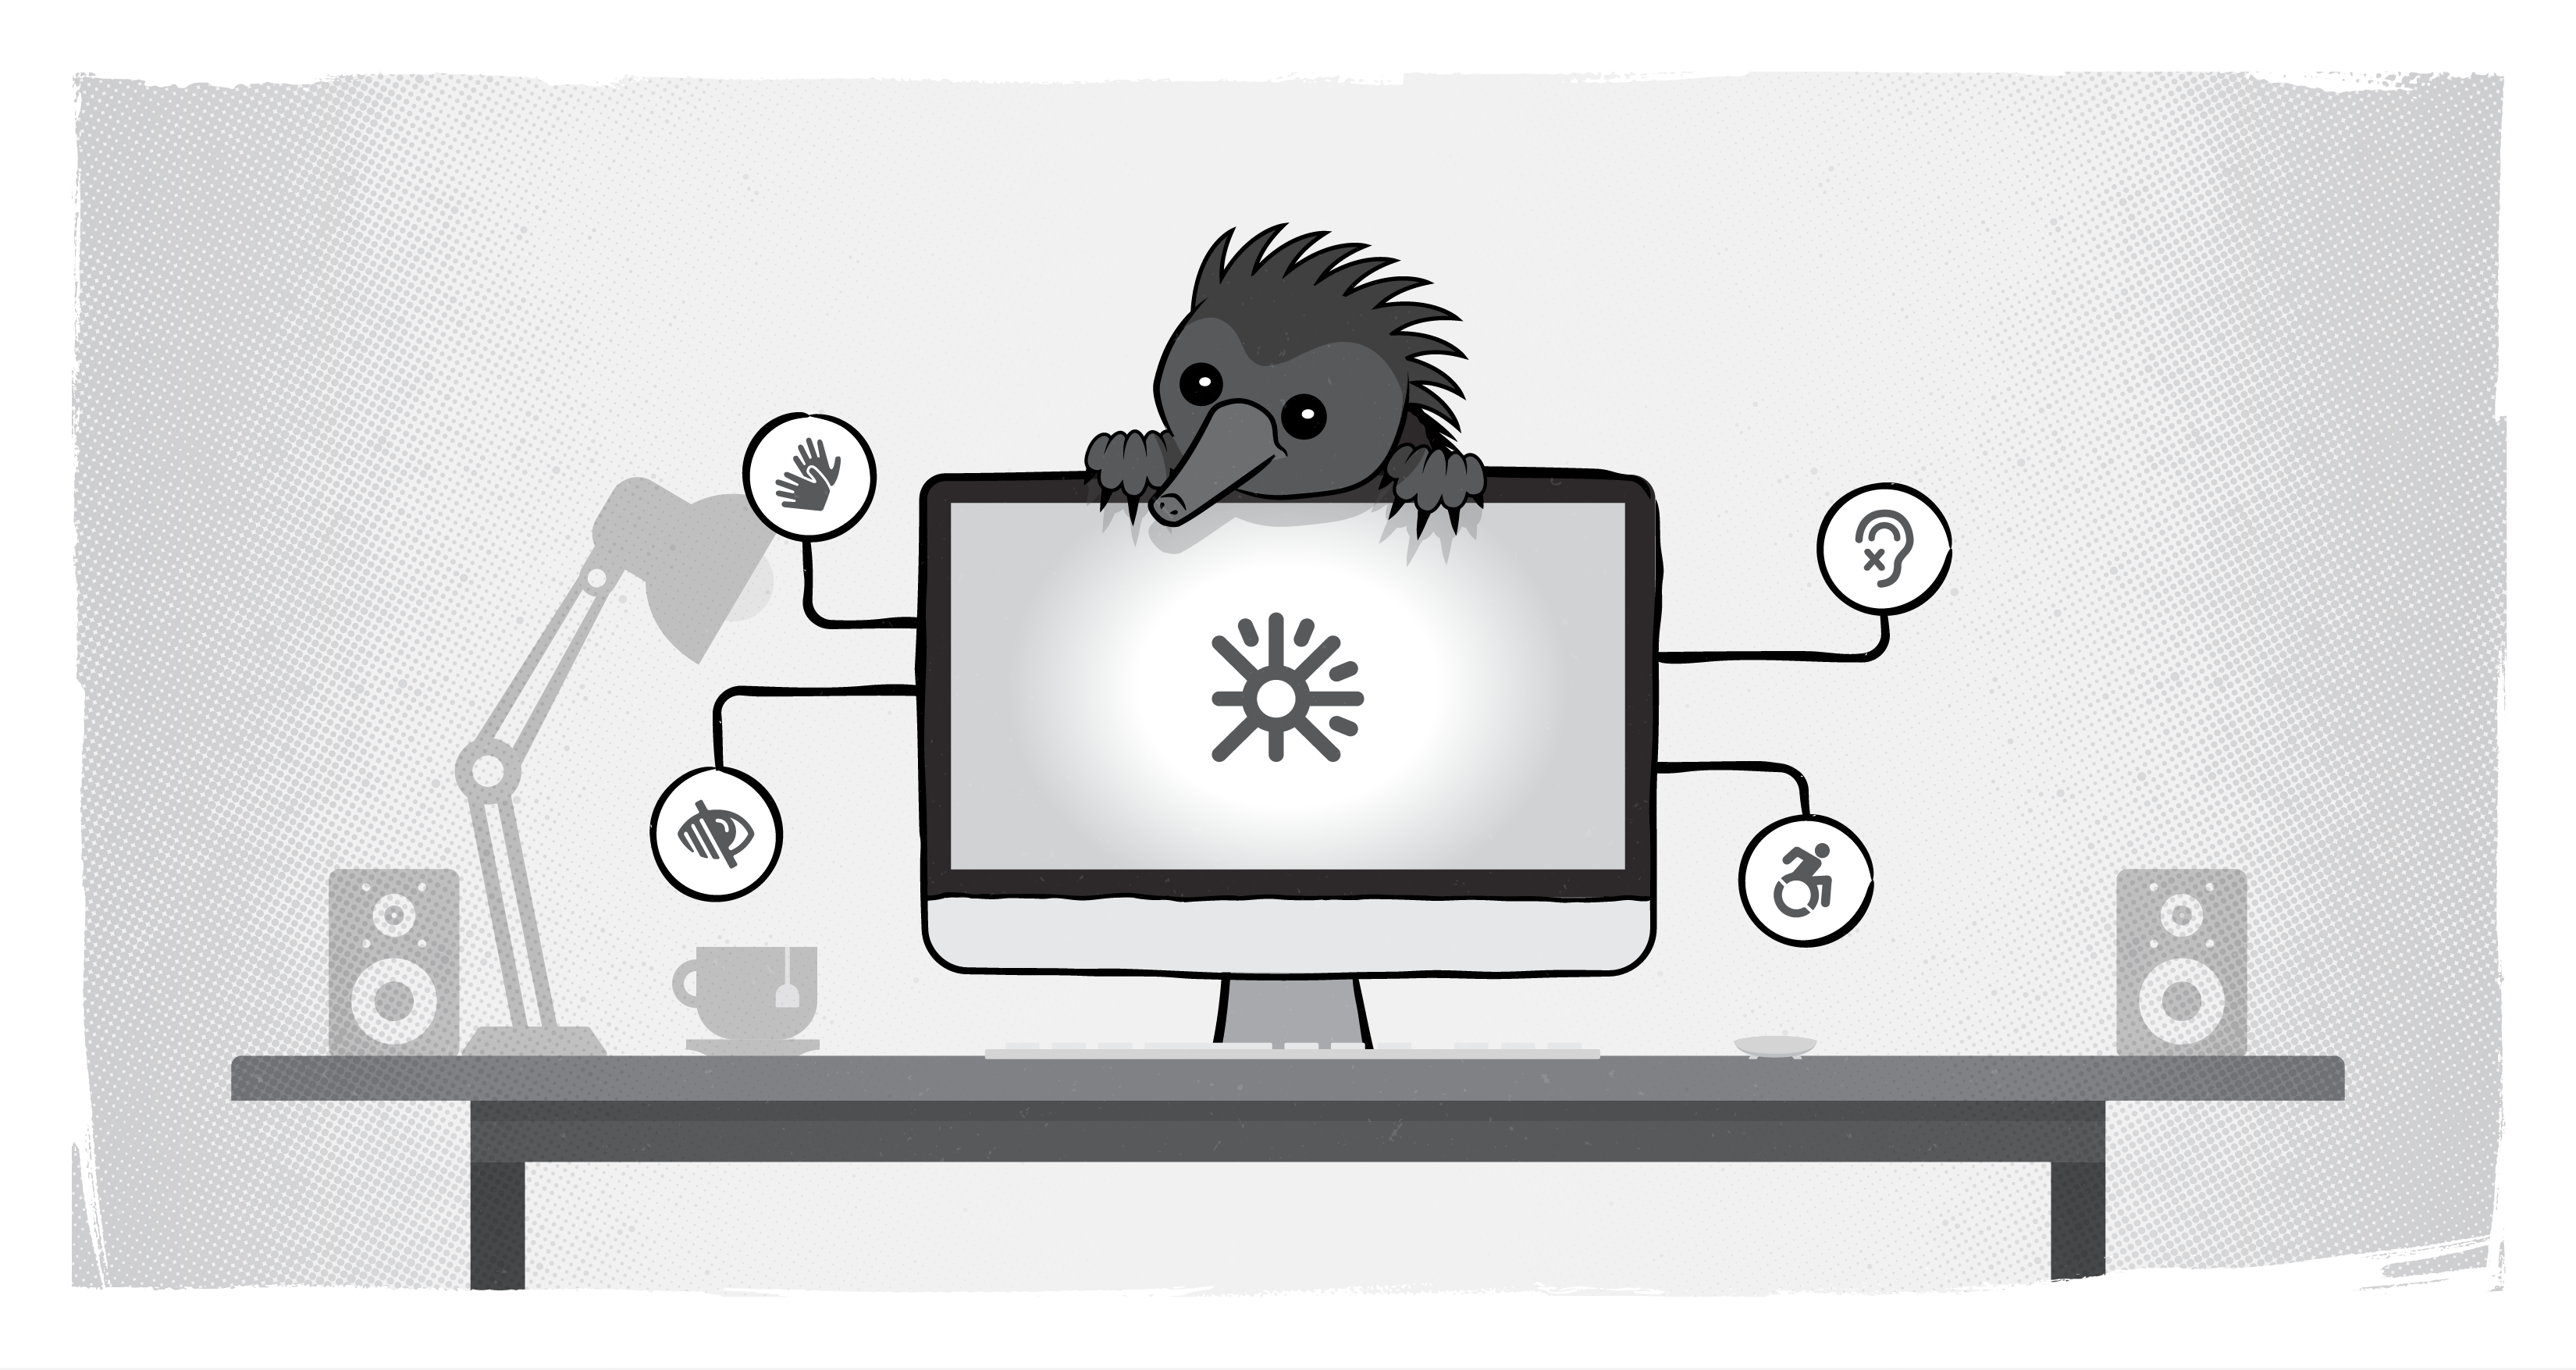 Echidna on computer with accessibility icons